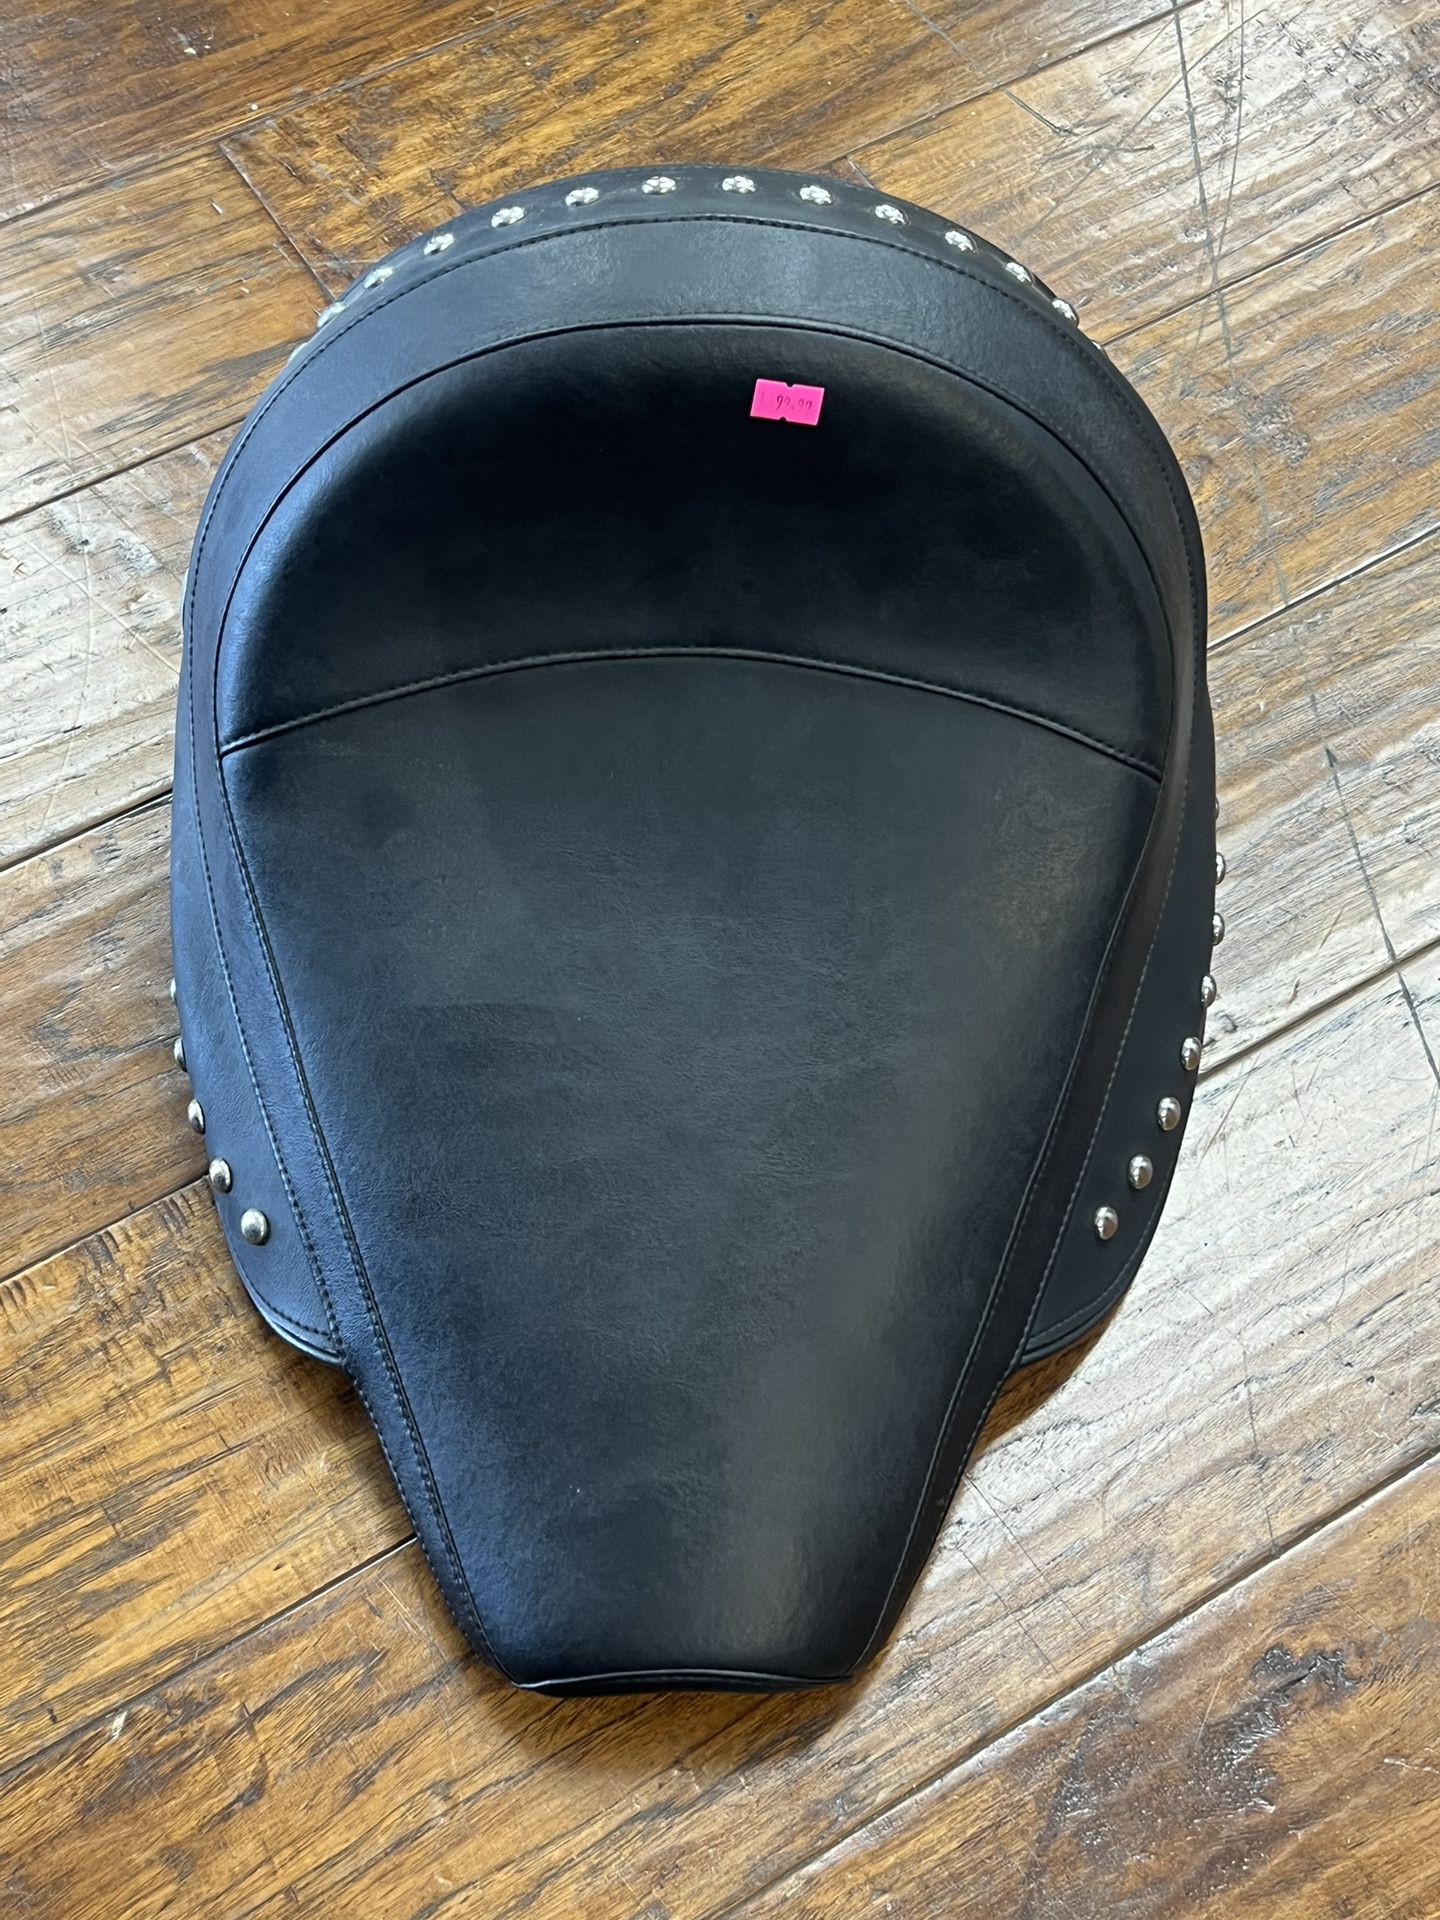 Indian Motorcycle Seat Studded